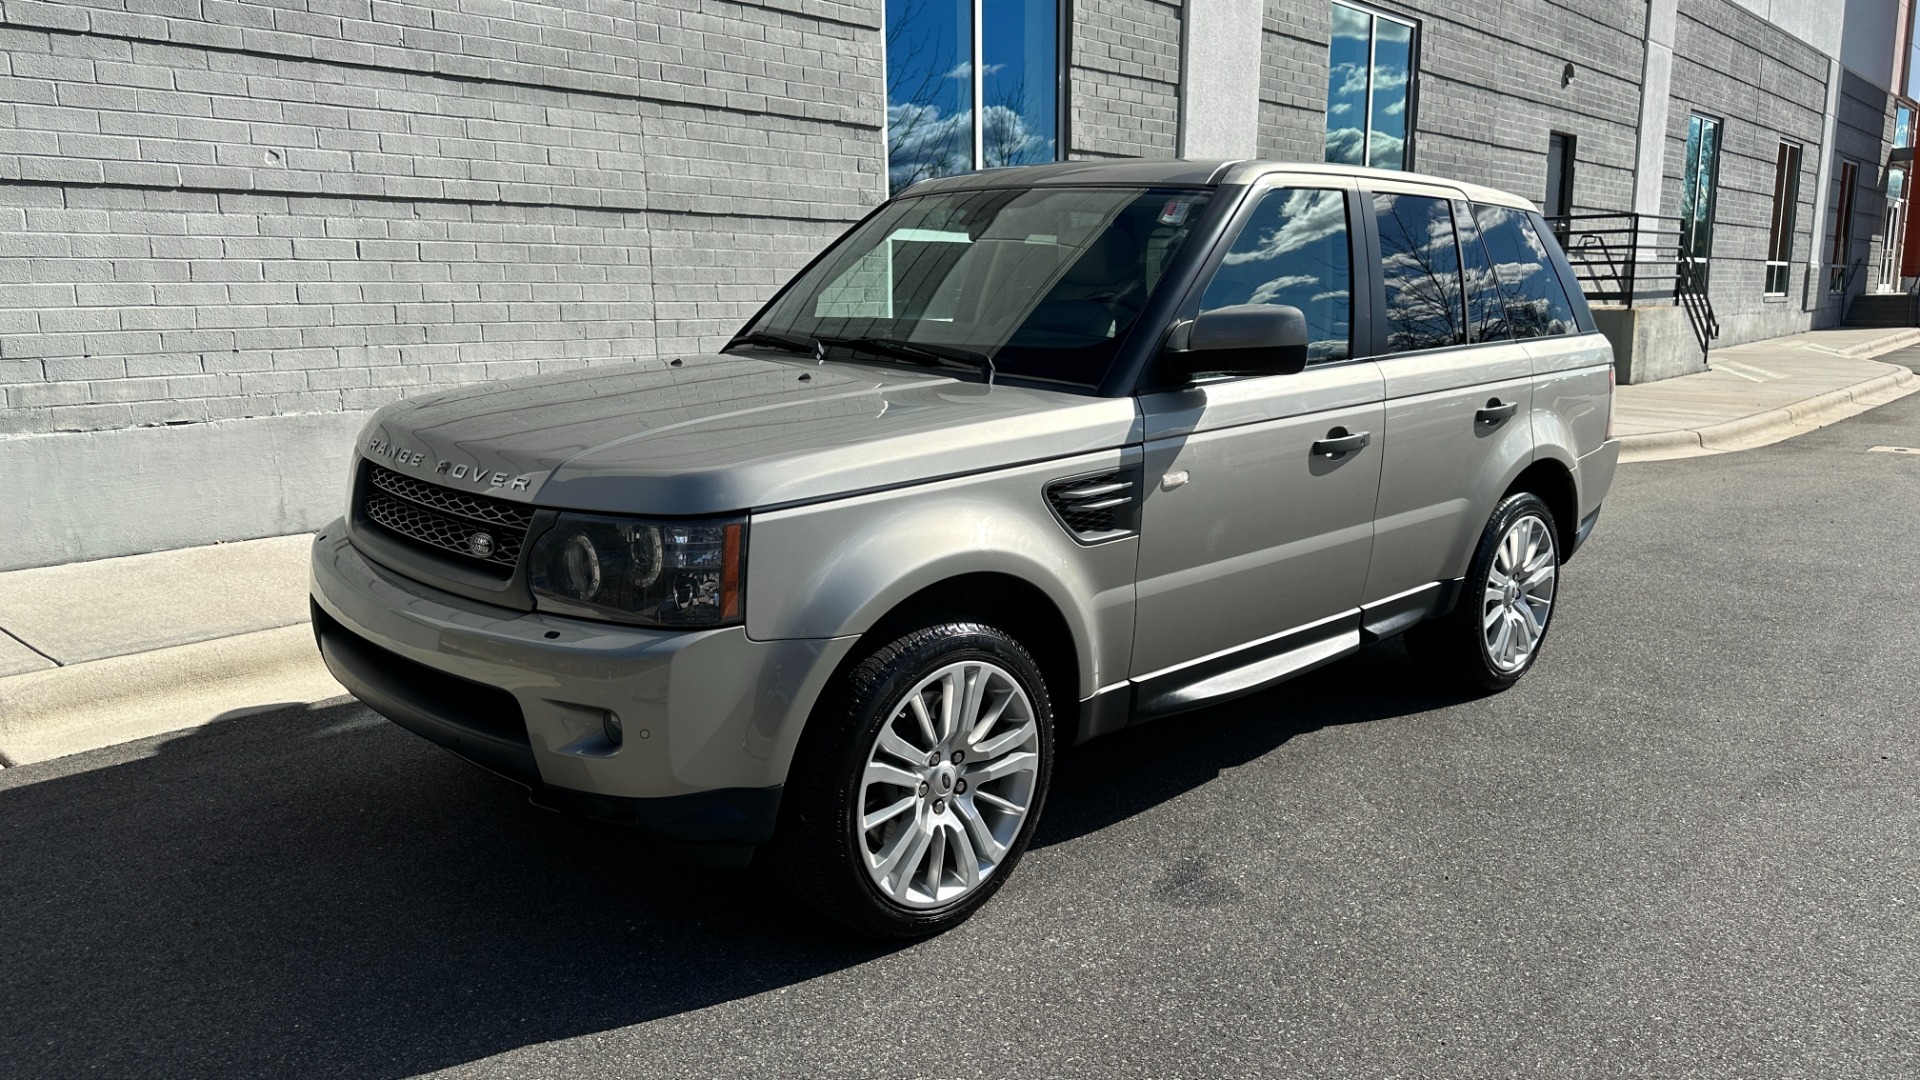 Used 2010 Land Rover Range Rover Sport HSE LUX / EXTENDED LEATHER / LUXURY INTERIOR PKG / REAR ENTERTAINMENT for sale $14,995 at Formula Imports in Charlotte NC 28227 2